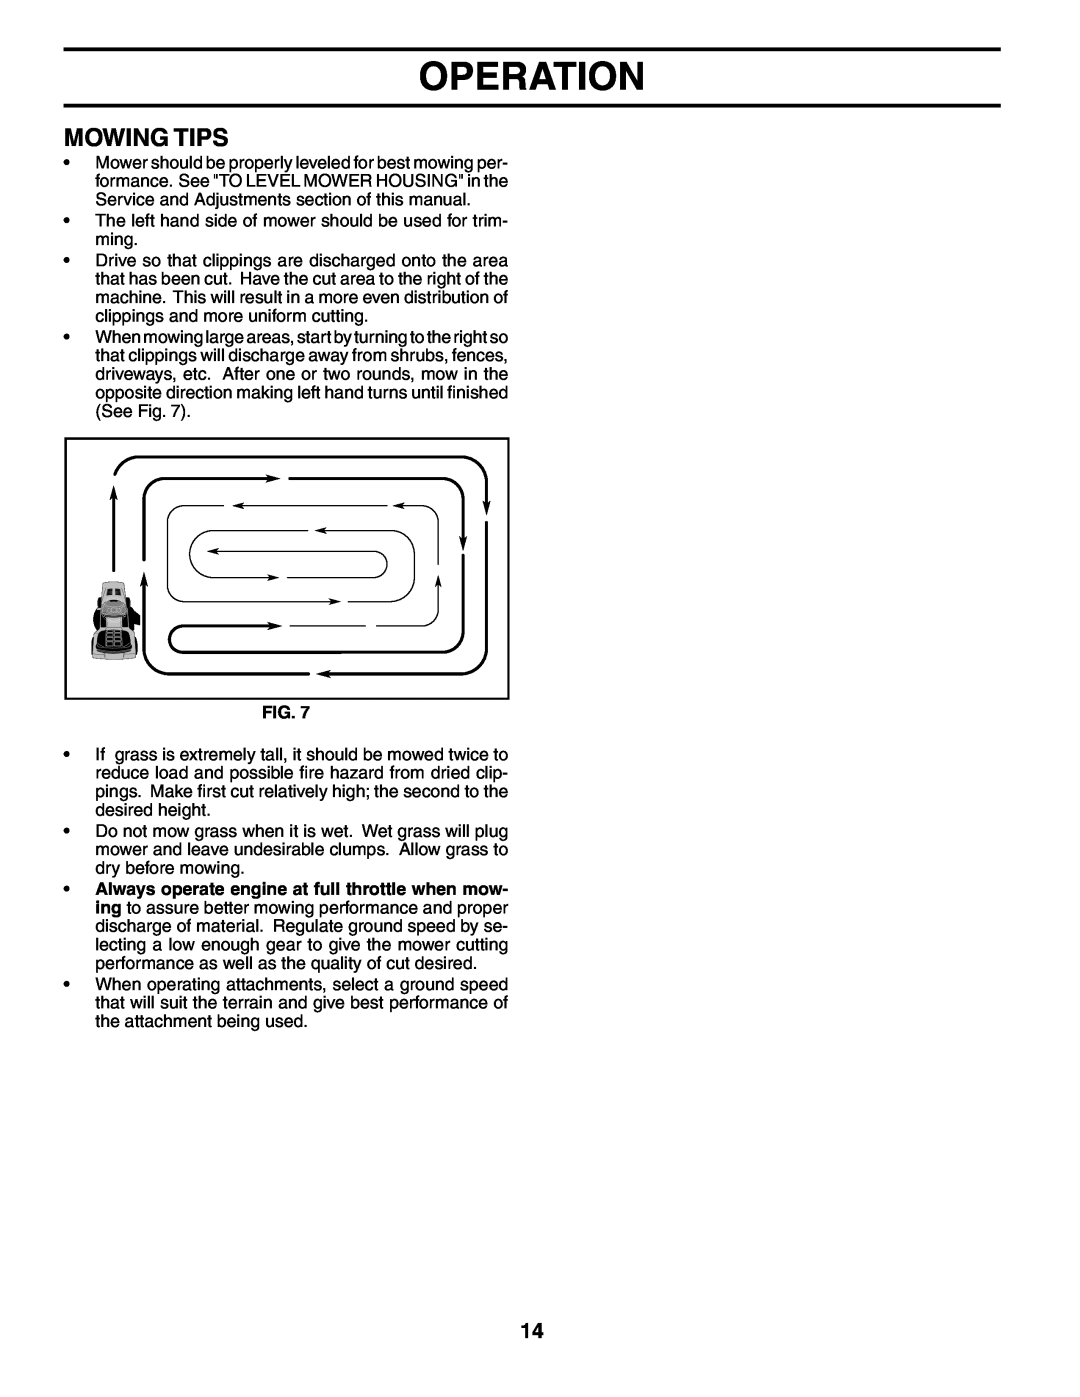 Weed Eater 195383 manual Mowing Tips, Operation 